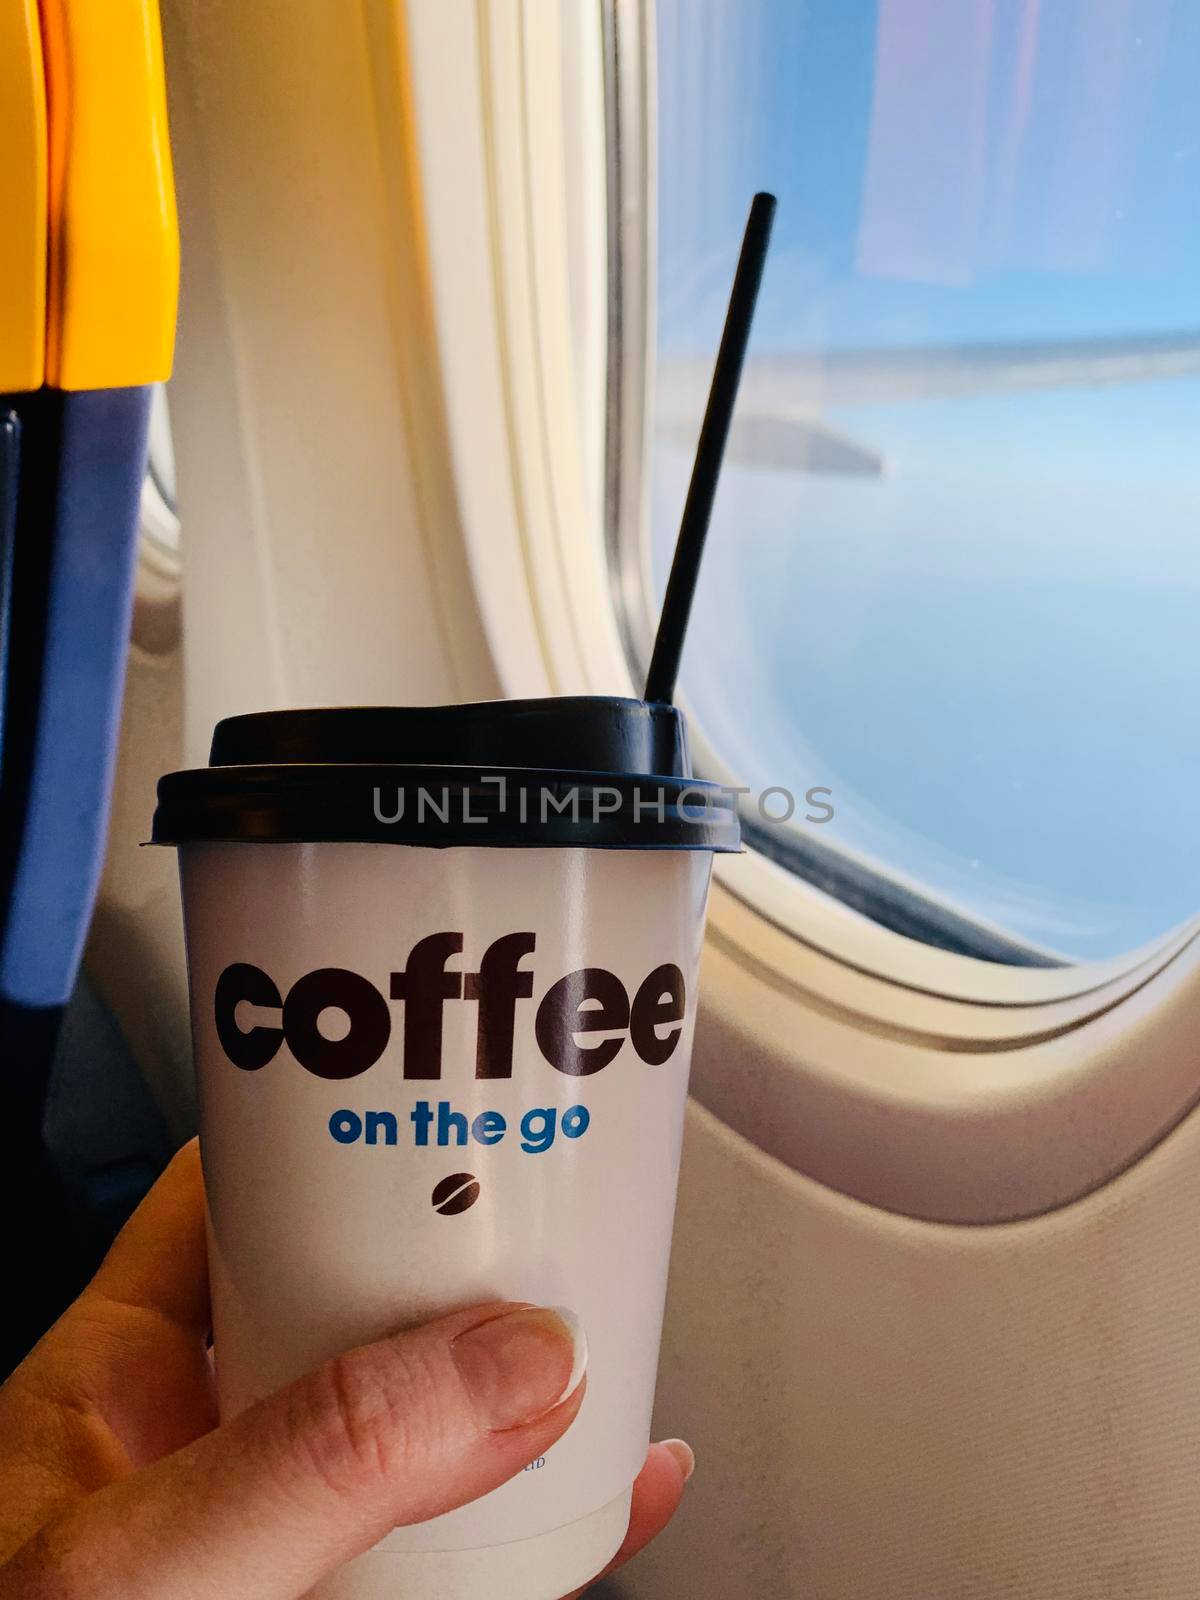 Woman drinking coffee on airplane. Woman hand holding white paper cup of hot coffee on the airplane.